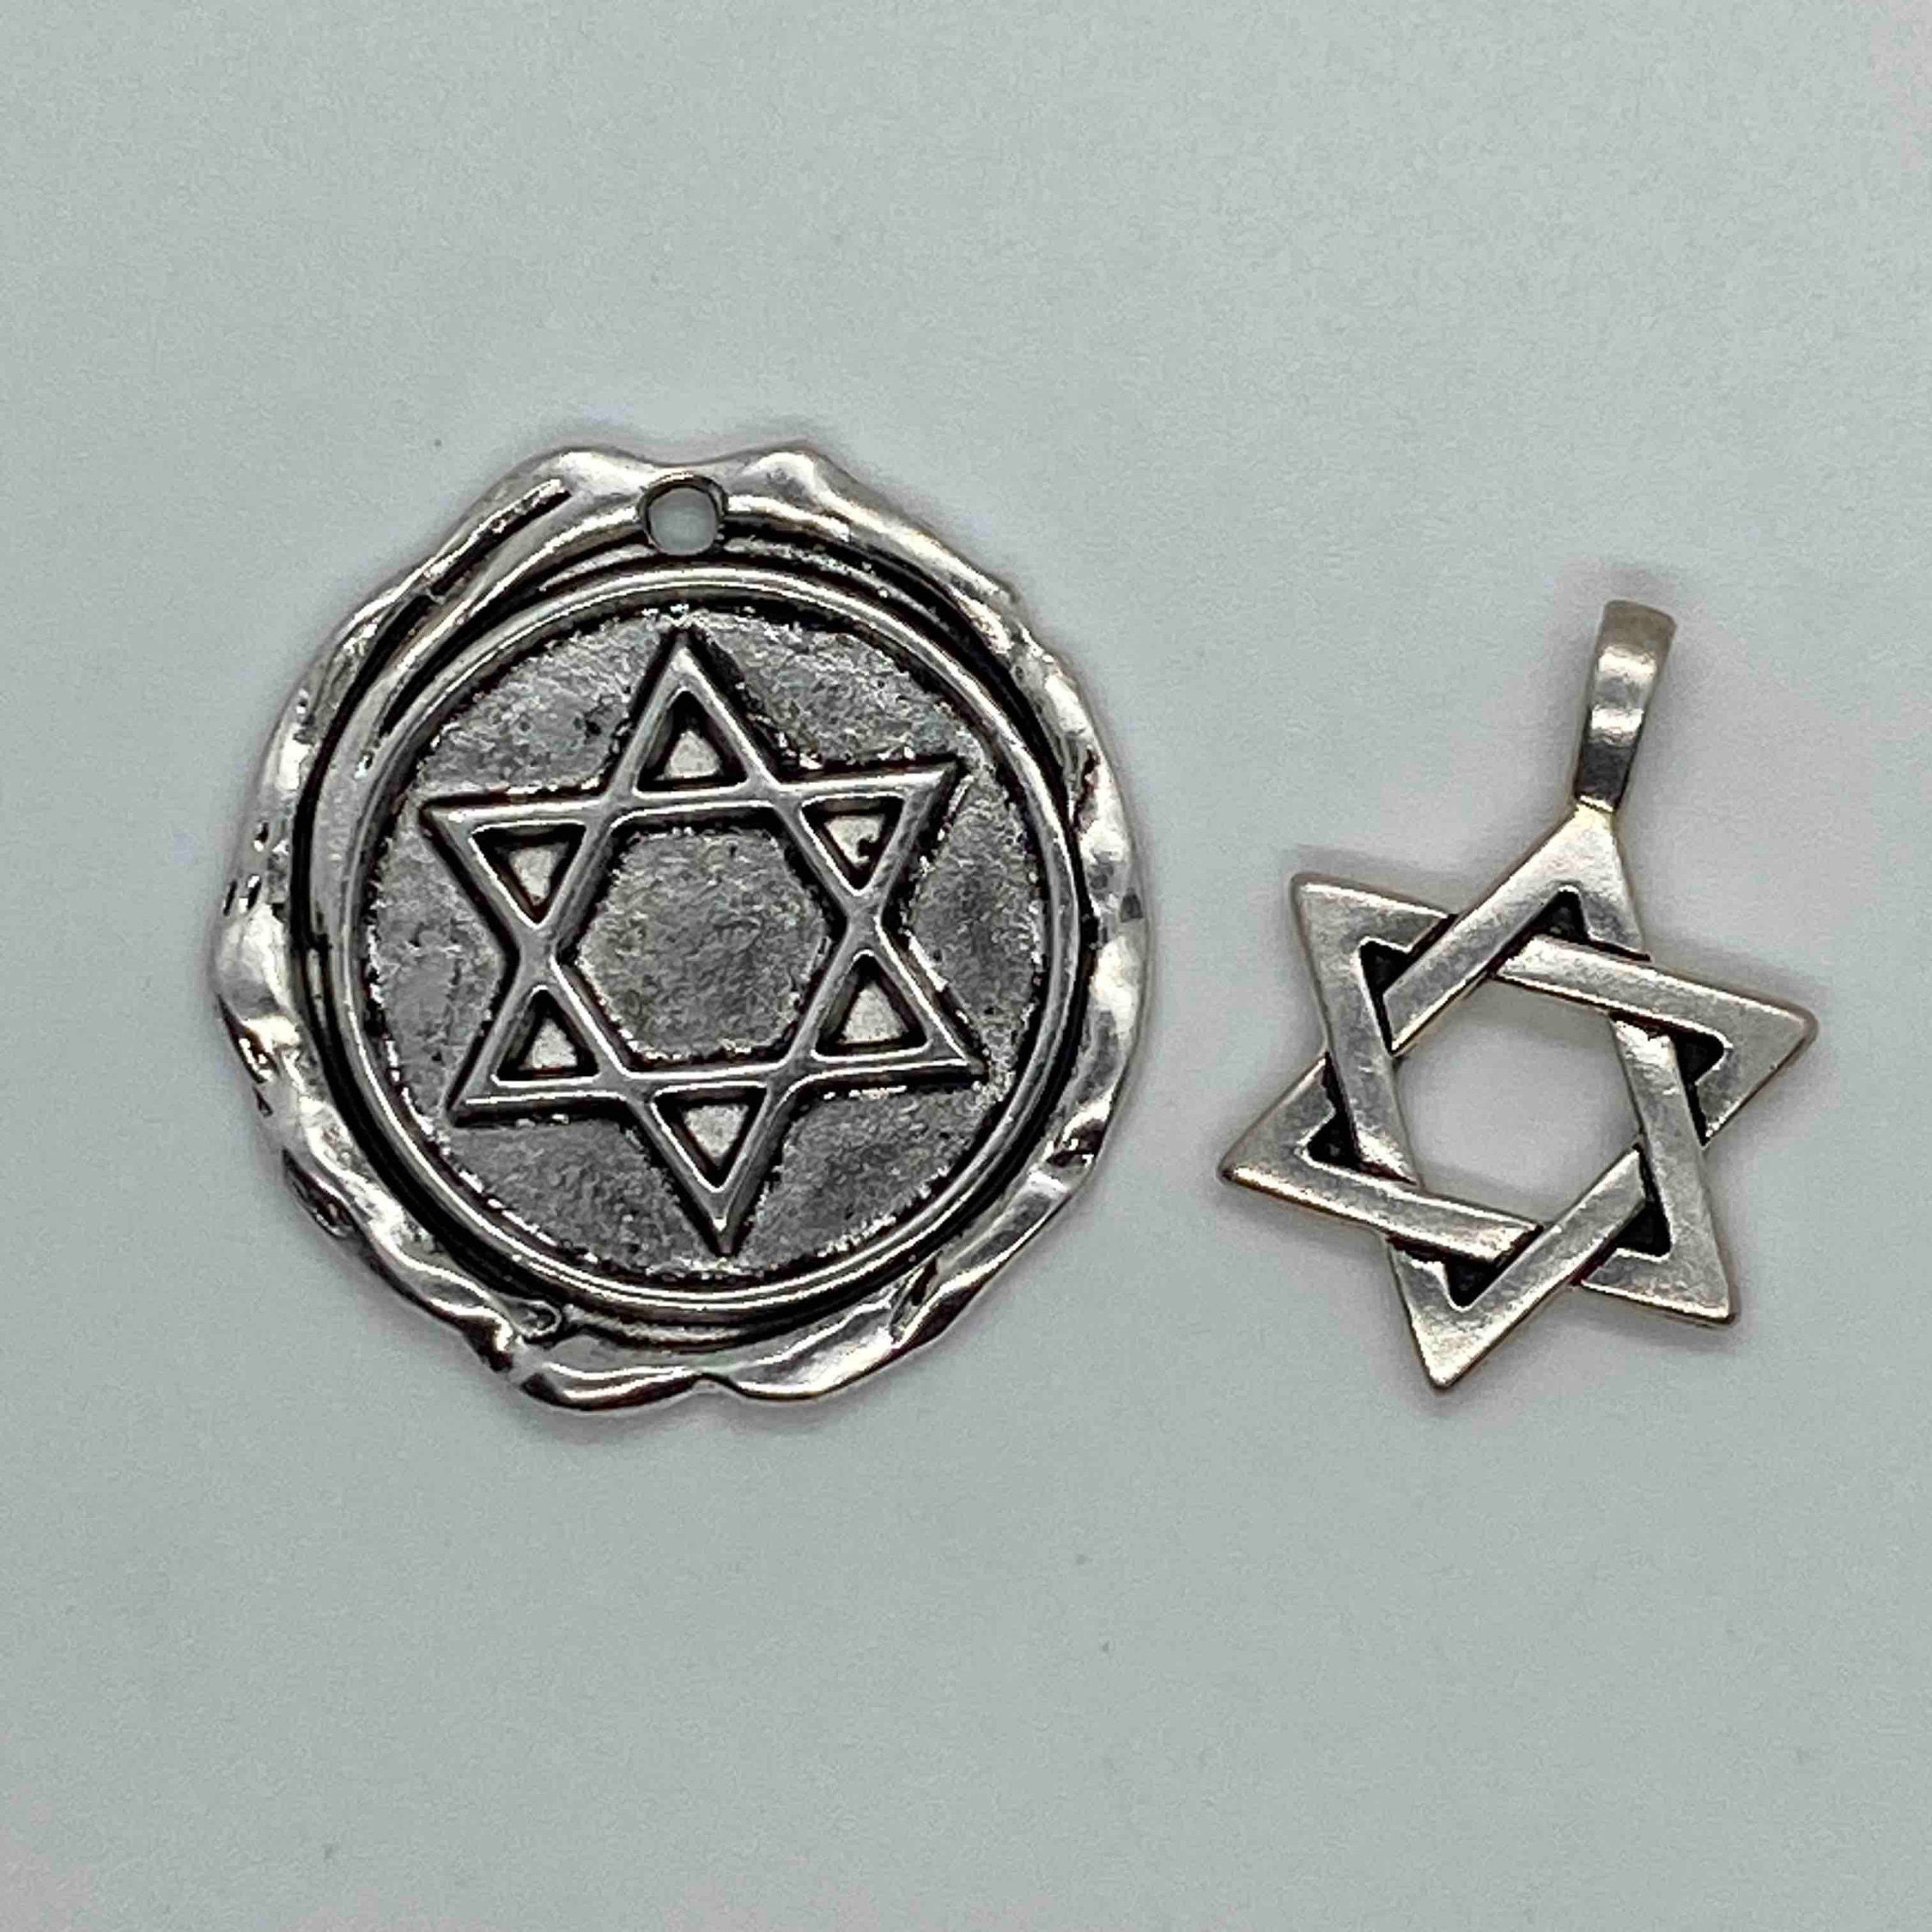 1:12 Star of David Dollhouse Miniature Jewelry Gold or Silver Metal Choice 